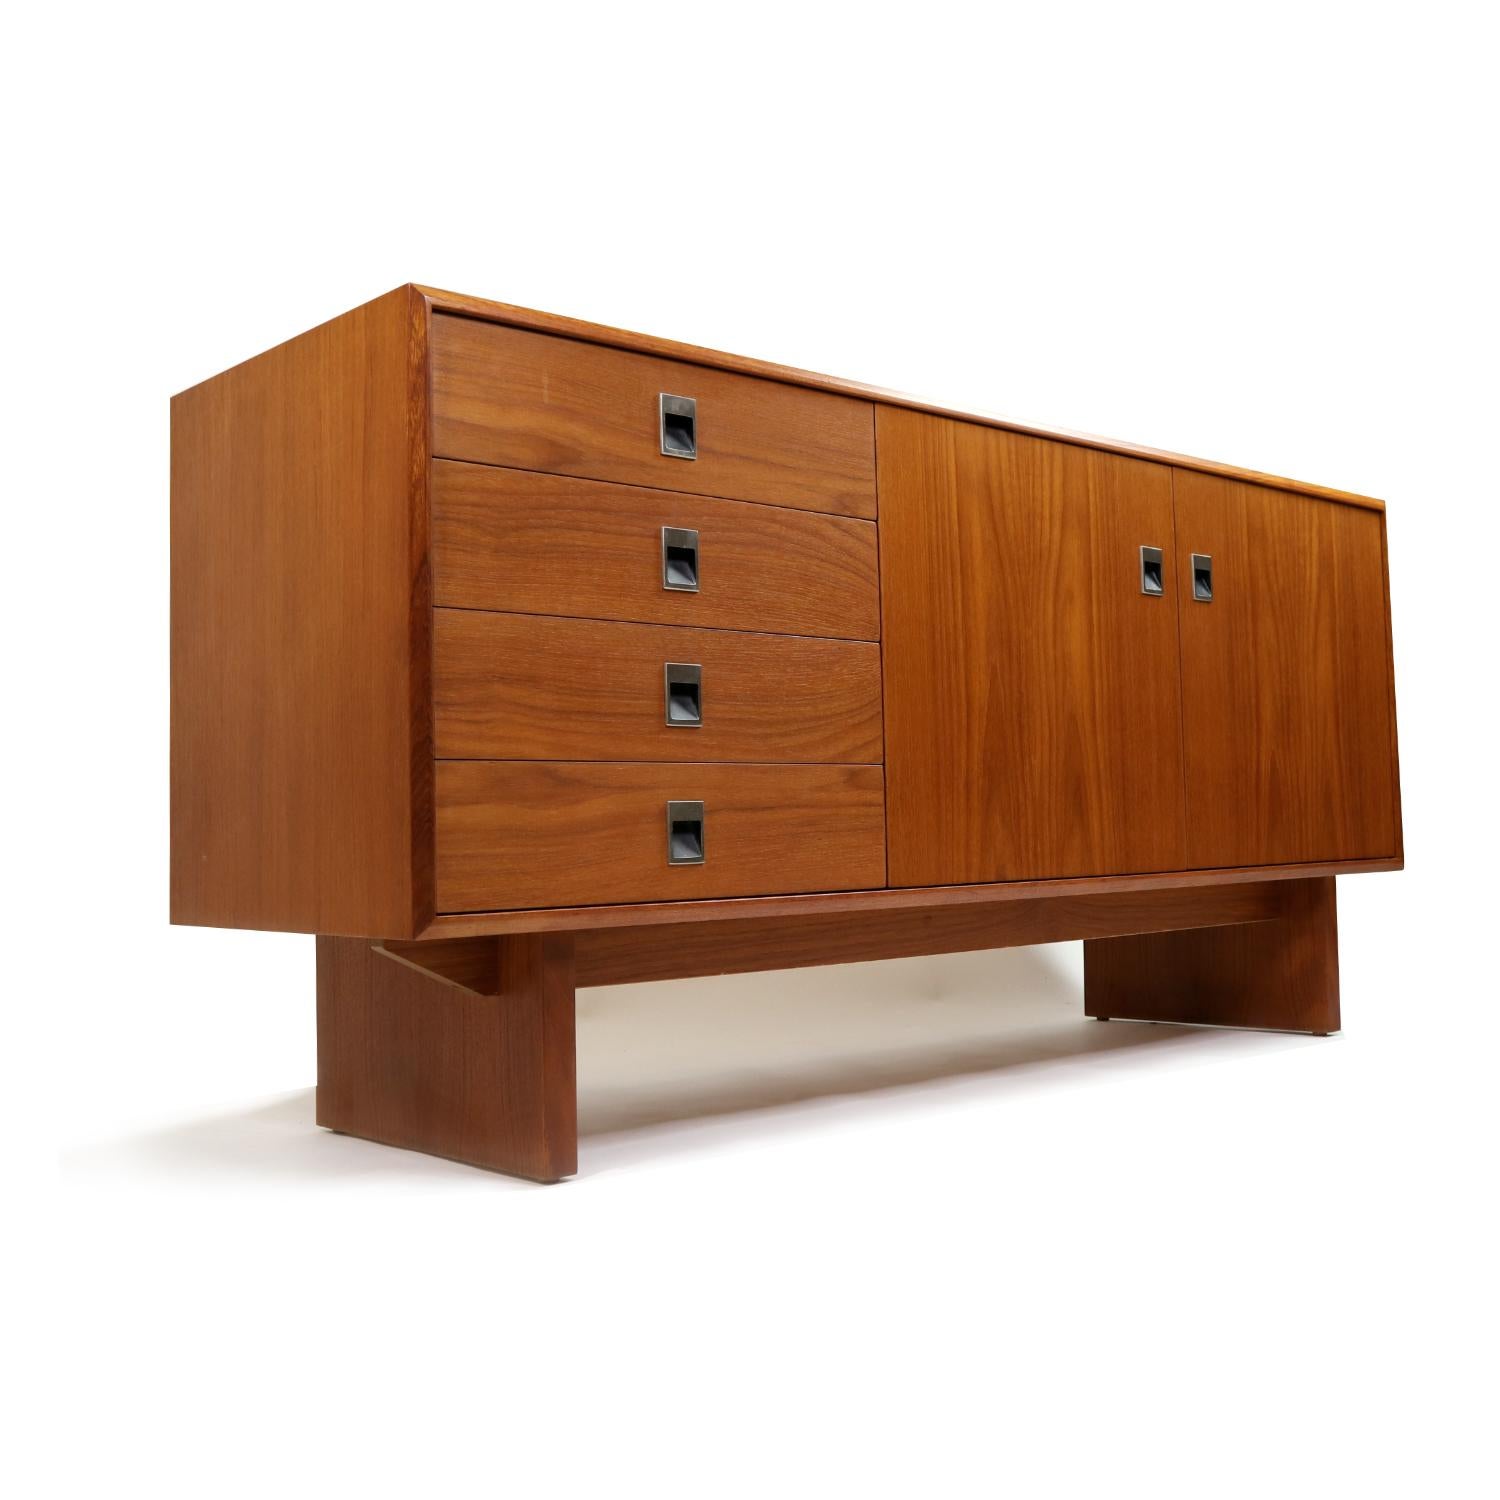 If you need a petite, low profile credenza, look no further! This late 1960s Canadian made teak credenza has atypical dimensions. We rarely get pieces this size, so if this is what you need, do not pass this by. Pristine original condition. Our